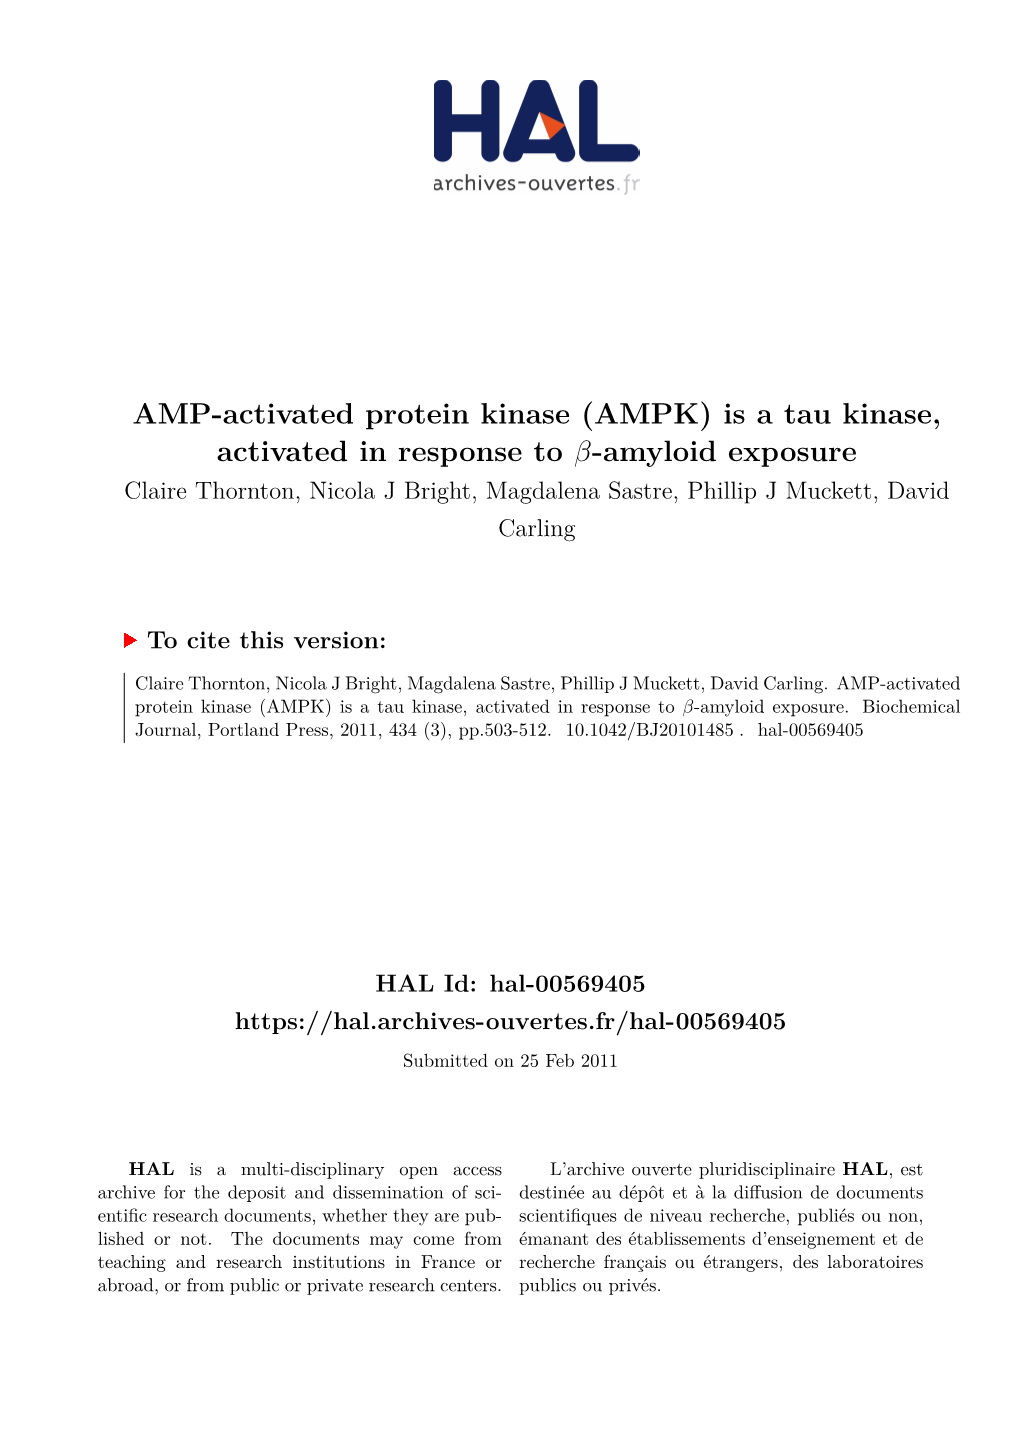 (AMPK) Is a Tau Kinase, Activated in Response to -Amyloid Exposure